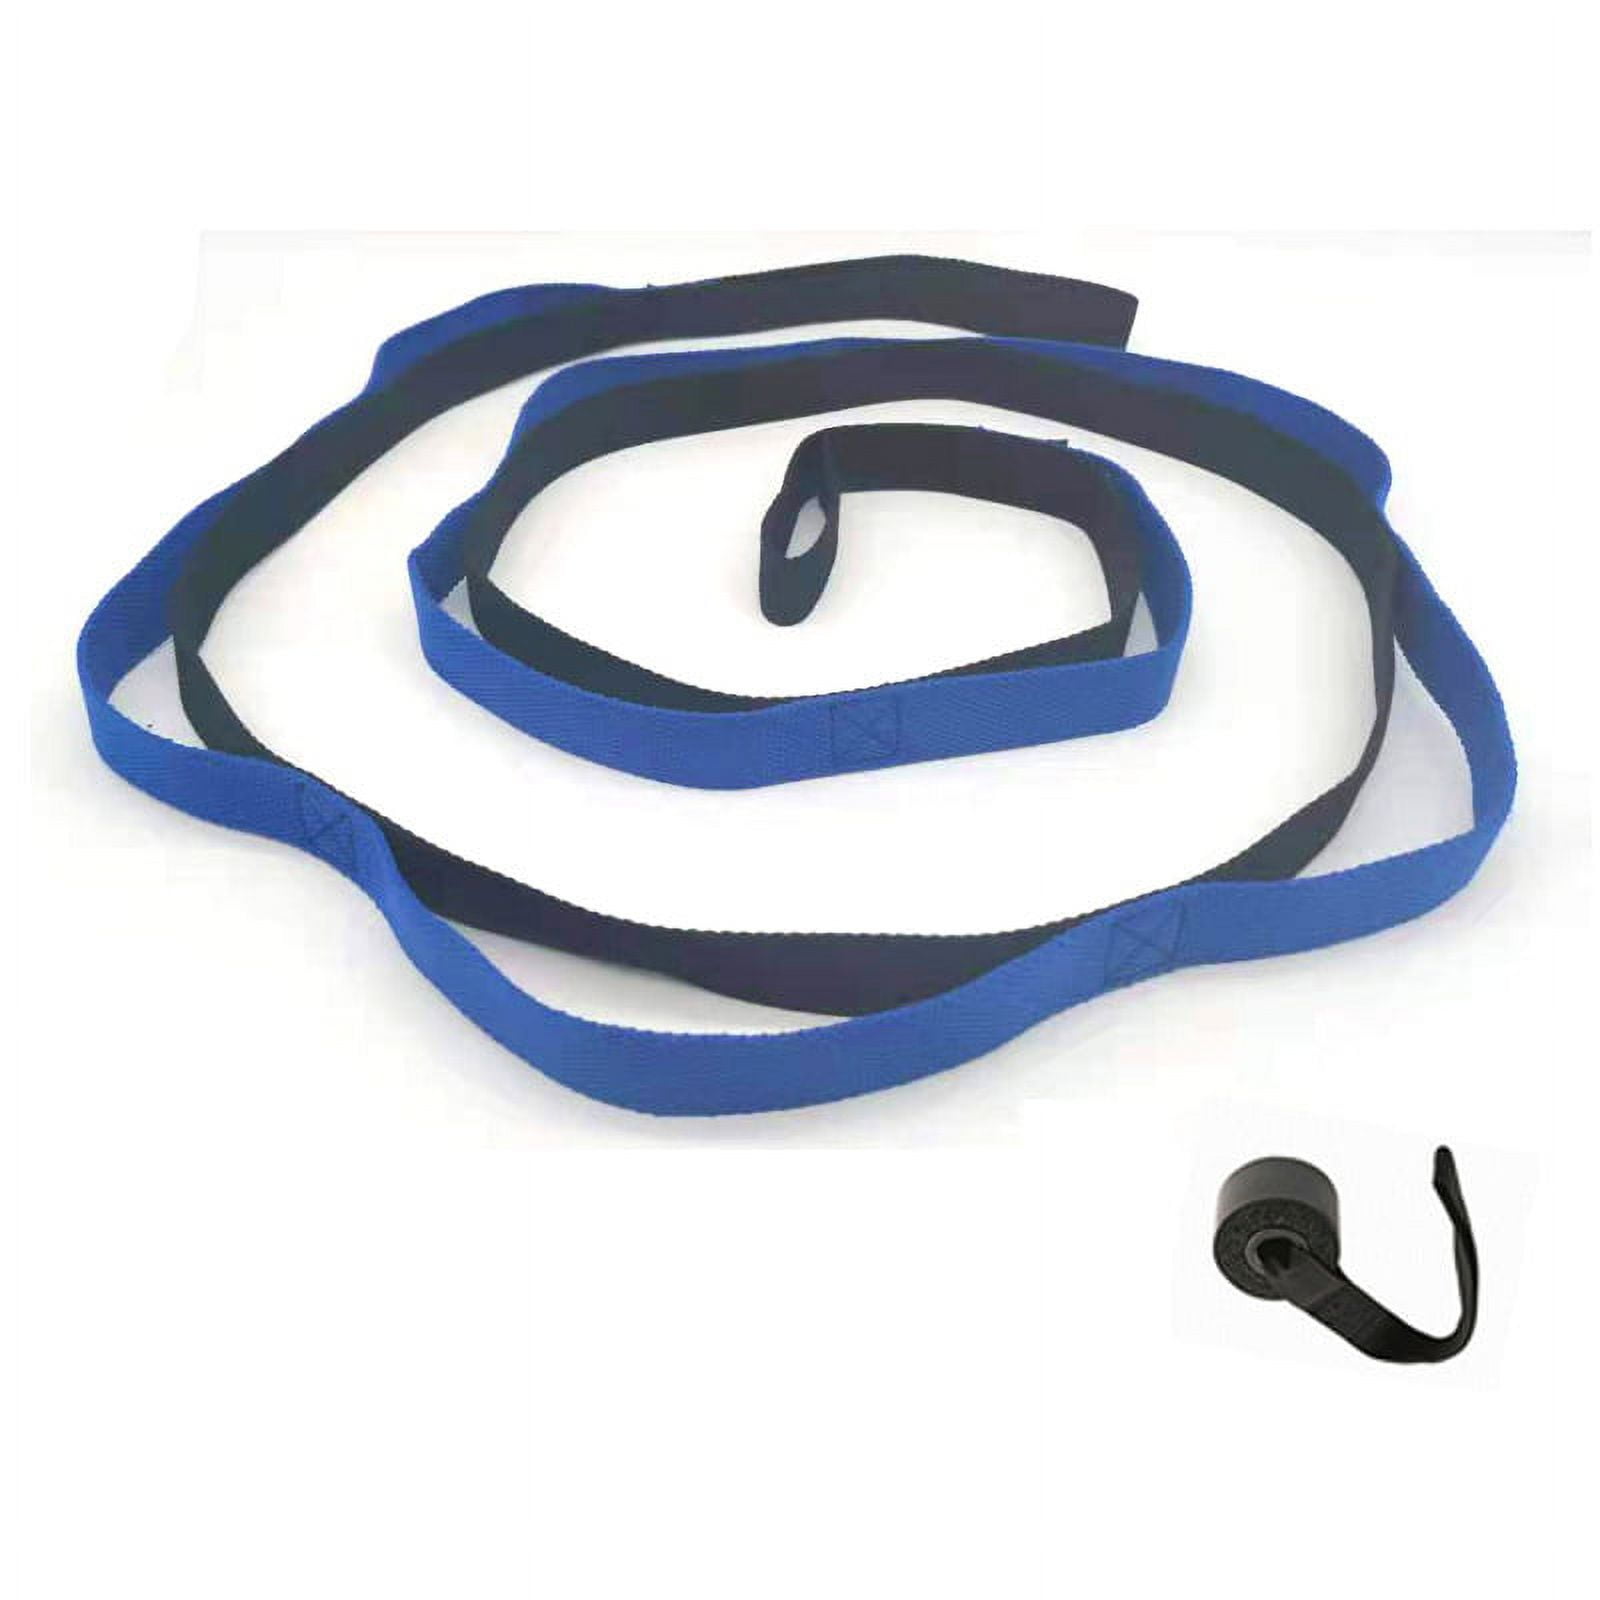 7 Ring Stretch and Resistance Exercise Band by FOMI Back, Foot